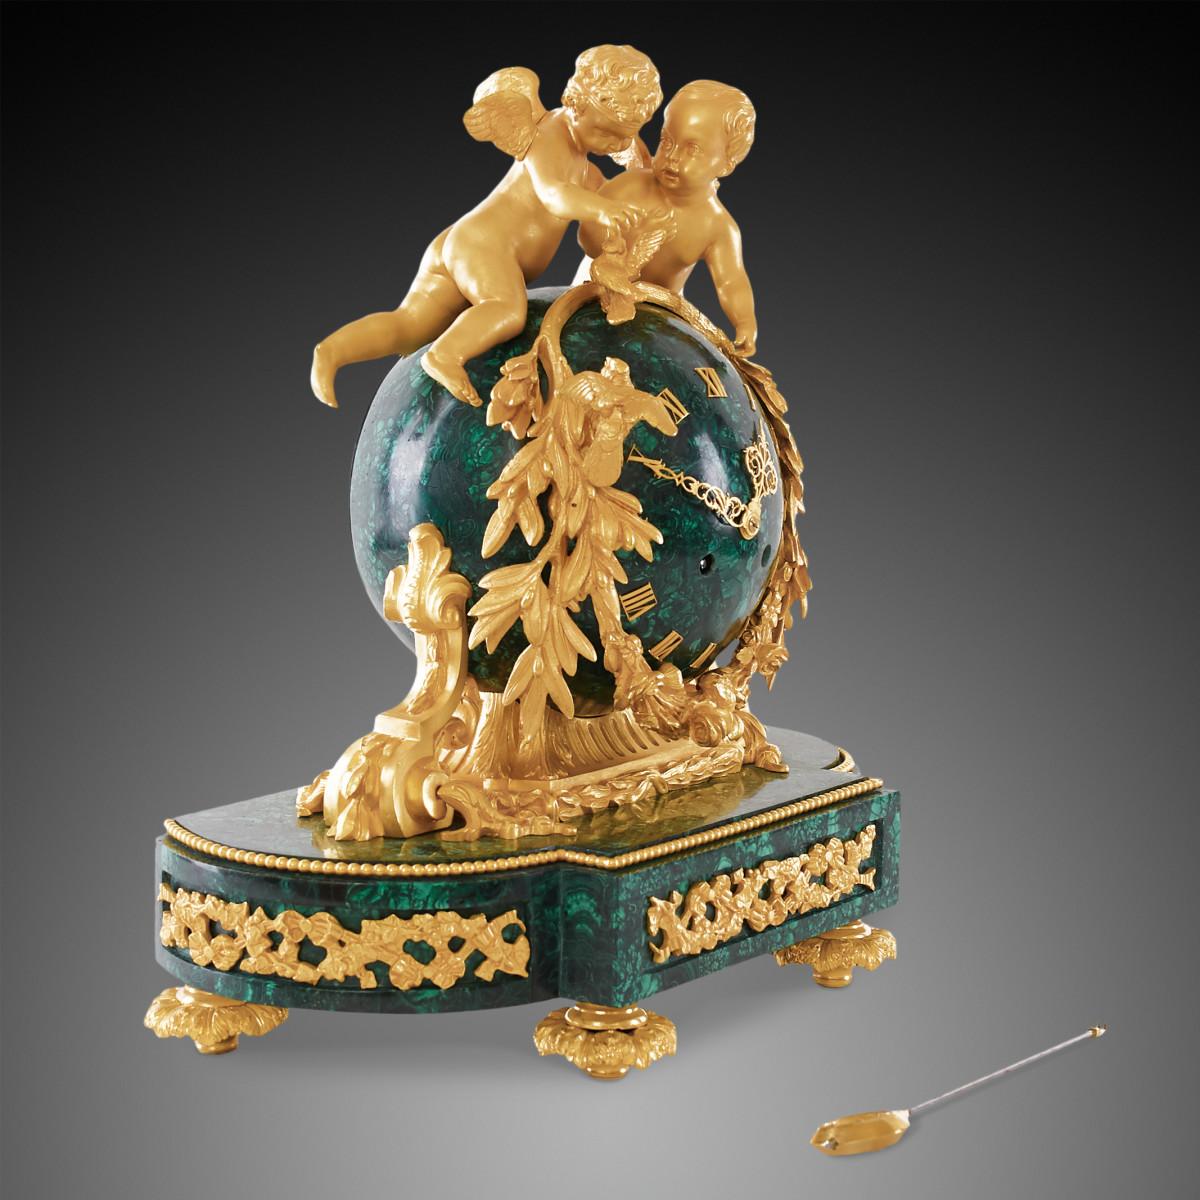 Cherubs Pendulum is an impressive work in the late 19th century following the design of the Louis XVI period. The clock itself has its own charm to catch people's attention from the first sight not only by its unique material but also its dedicated